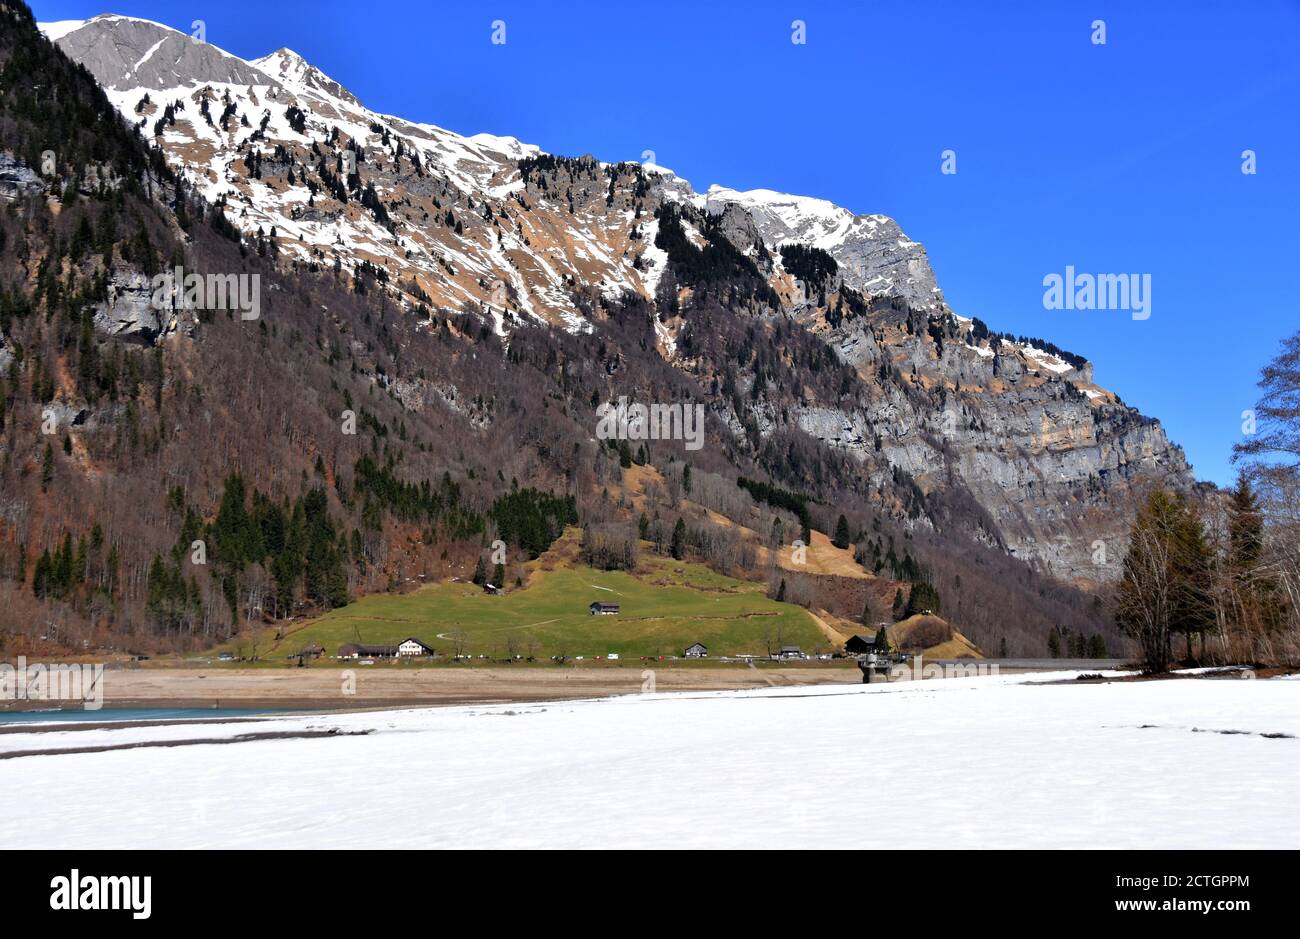 Panorama of Alps from Klontalersee lake in the foreground in early spring sunny day in Klöntal, Schwyz Alps, canton Glarus, Switzerland. Stock Photo